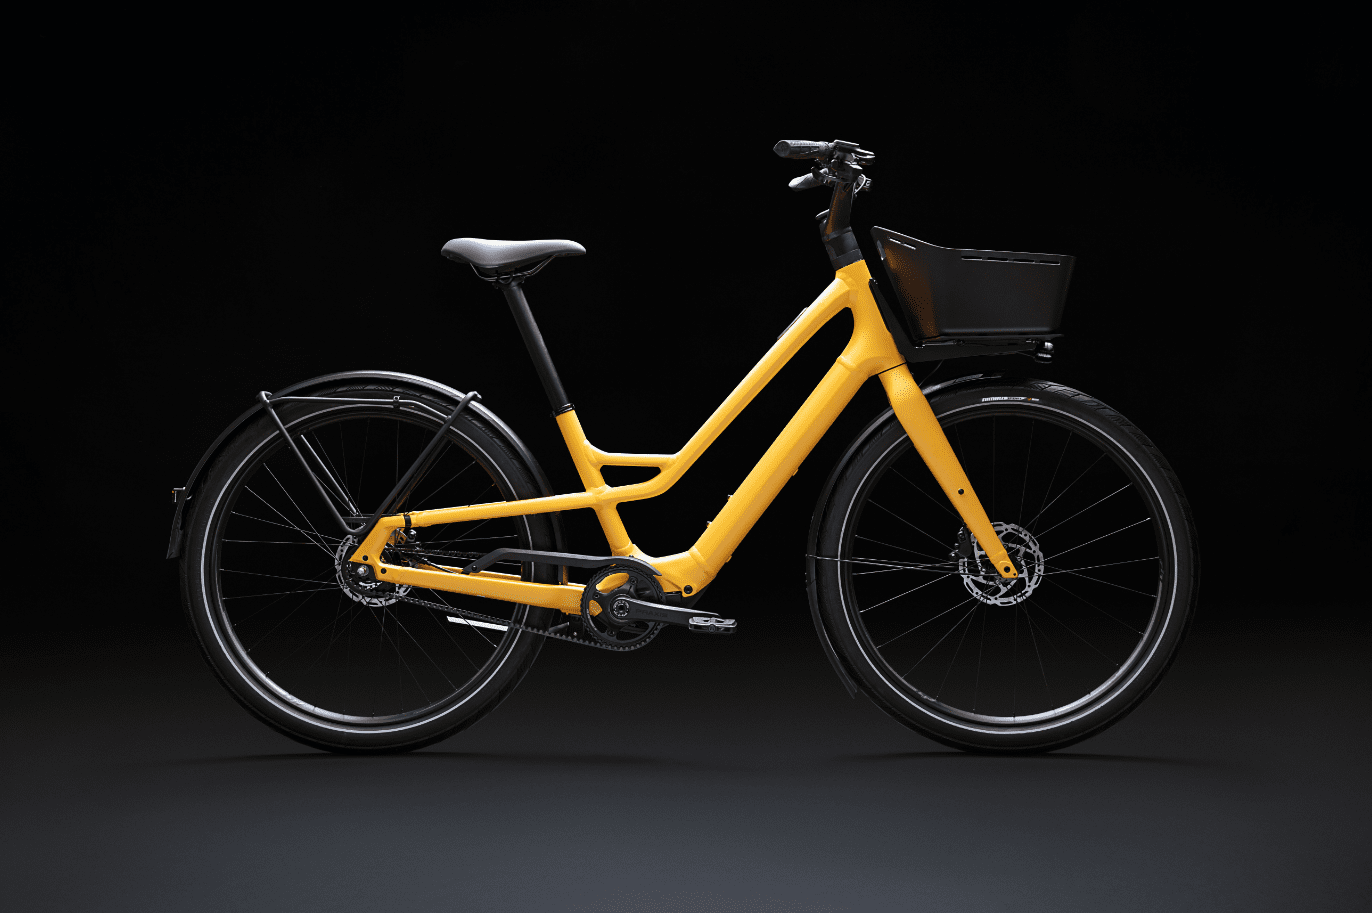 Specialized’s Como SL is a lightweight cruiser ebike with cargo chops